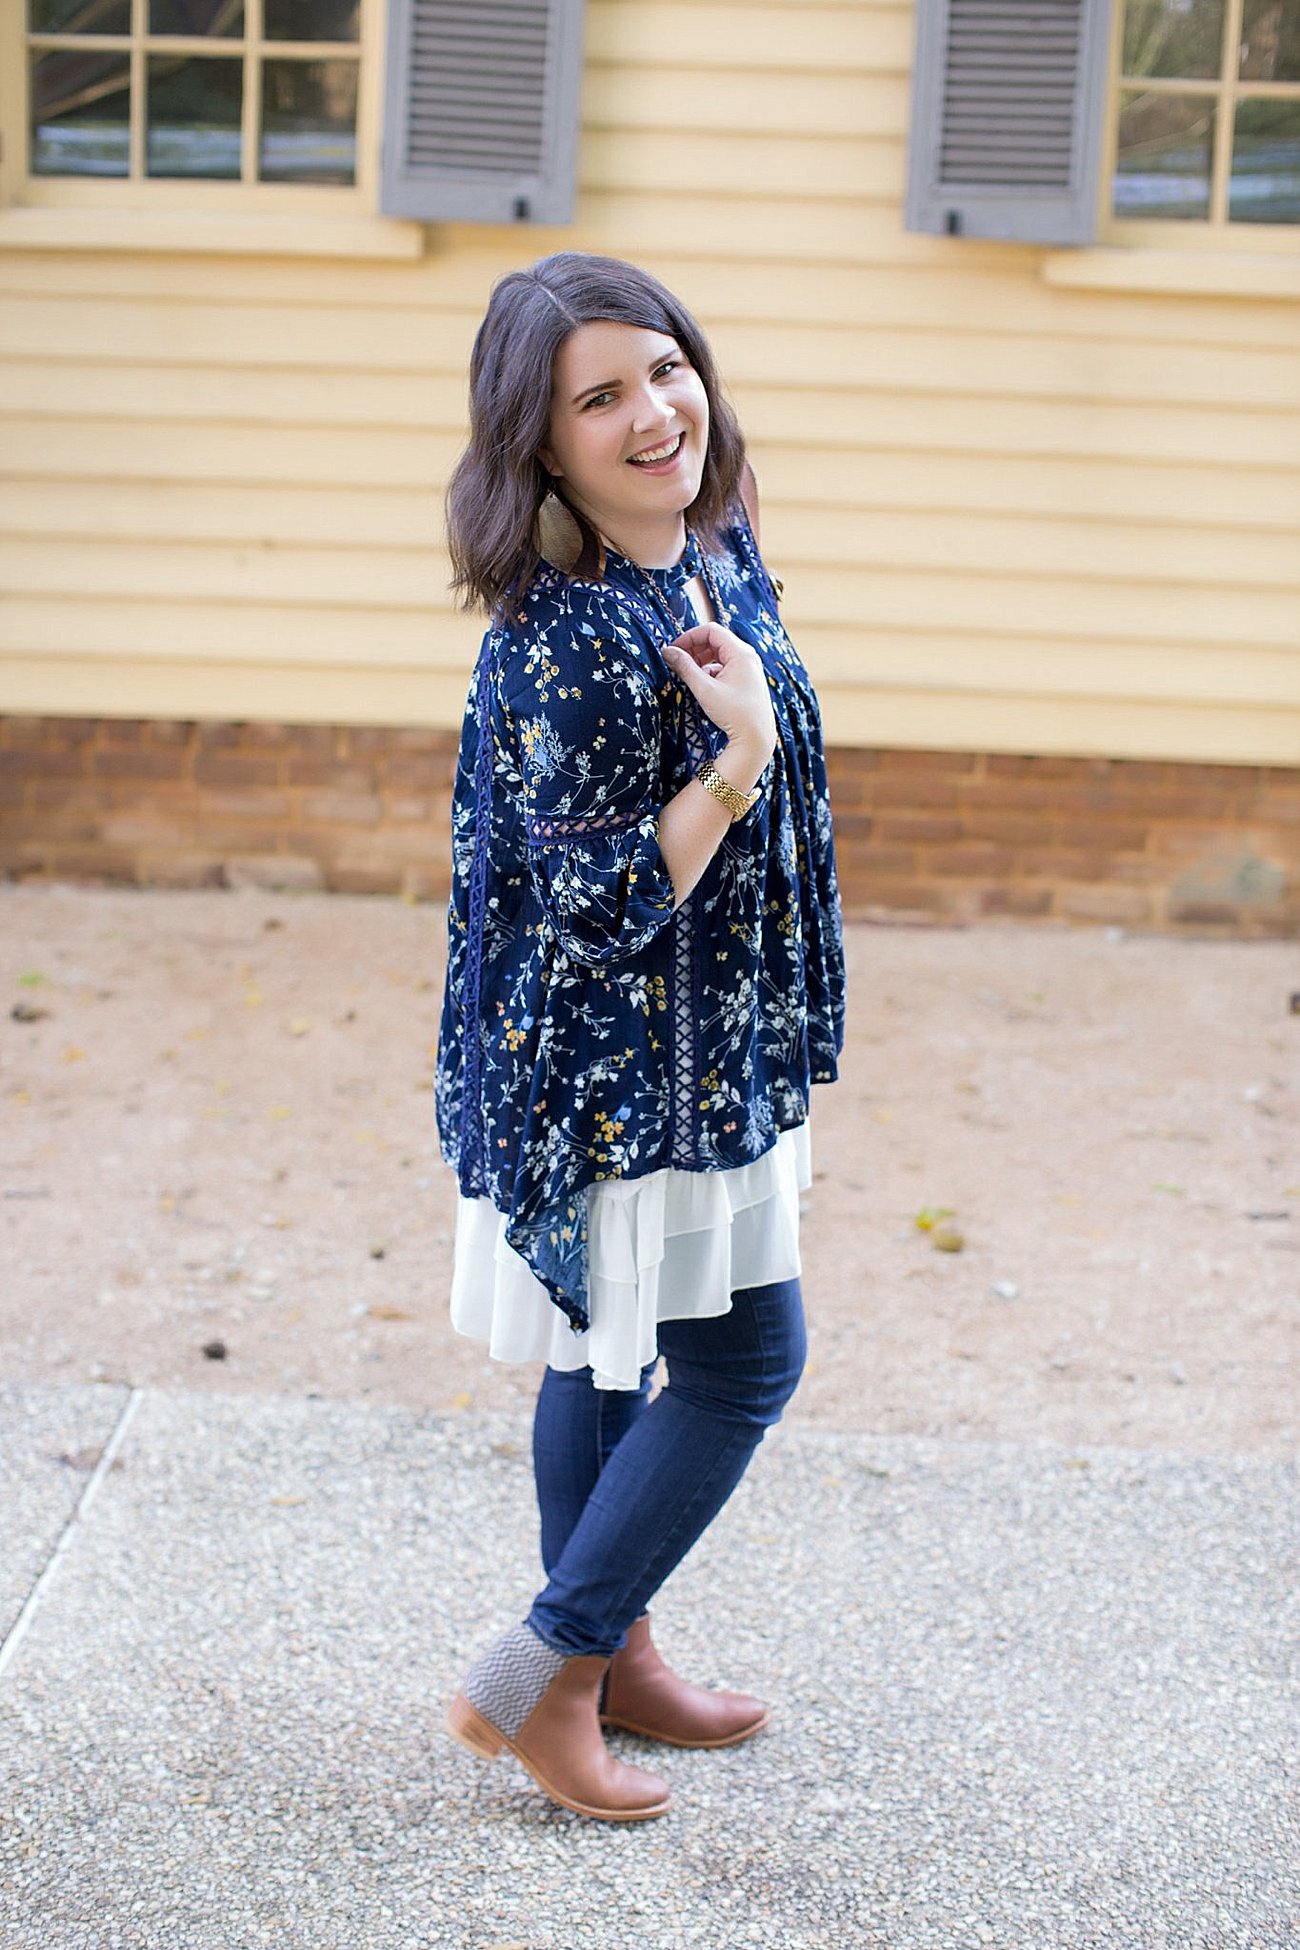 Grace & Lace peasant top and chiffon lace extender from The Flourish Market, Paige denim, Root Collective espe booties | Ethical Fashion, North Carolina Life and Style Blogger (7)